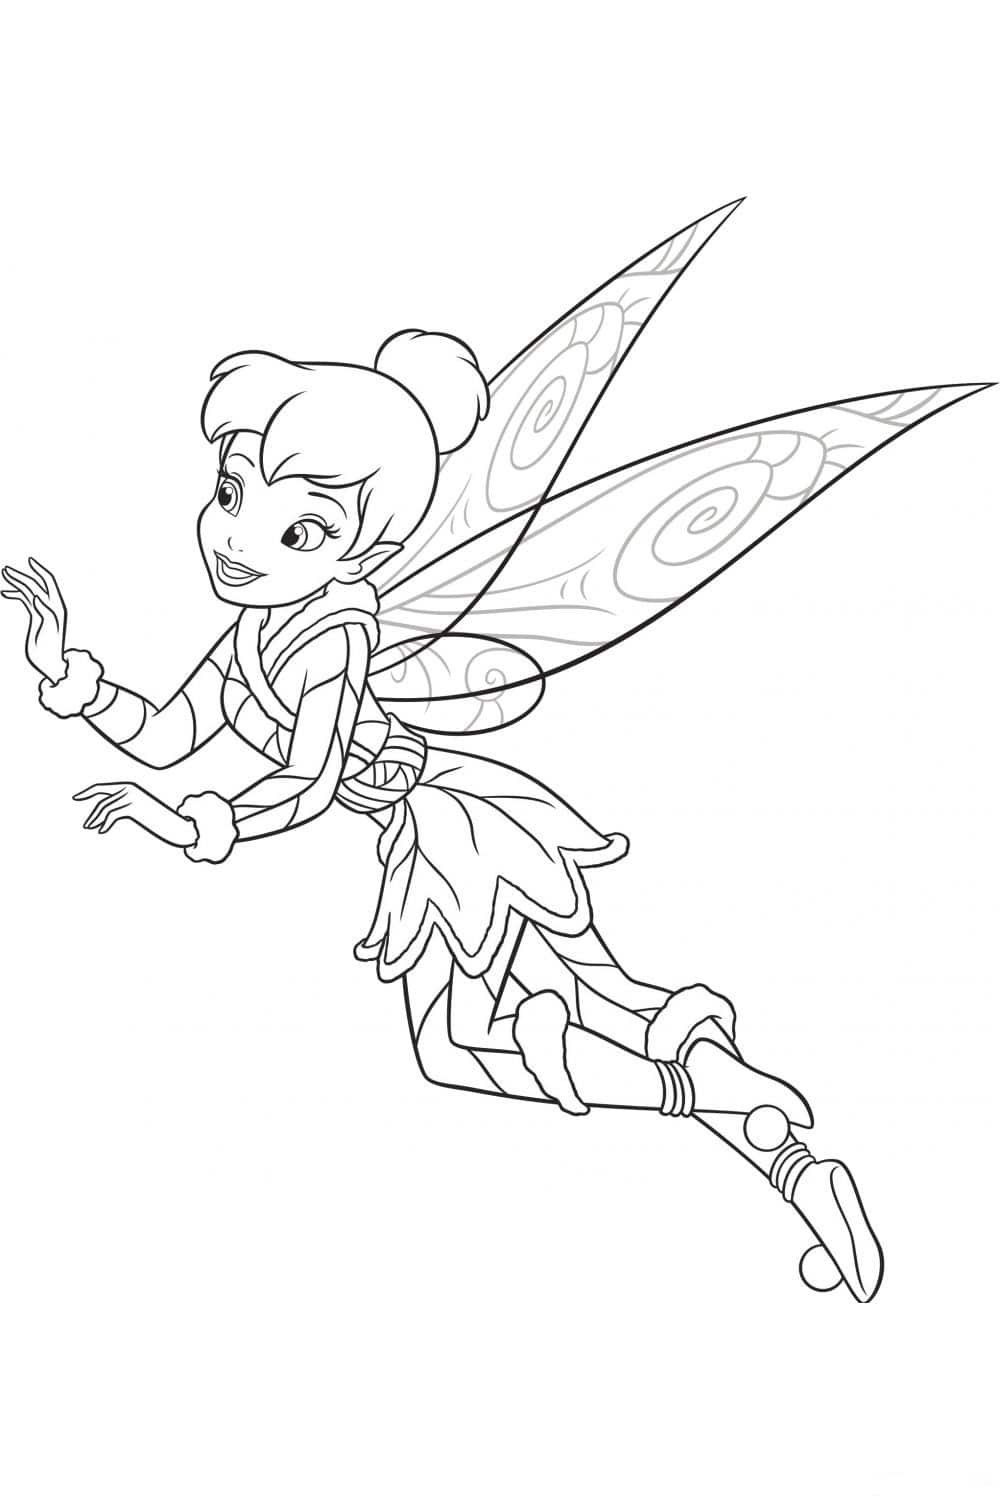 Drawing of a forest fairy in shoes with pom-poms